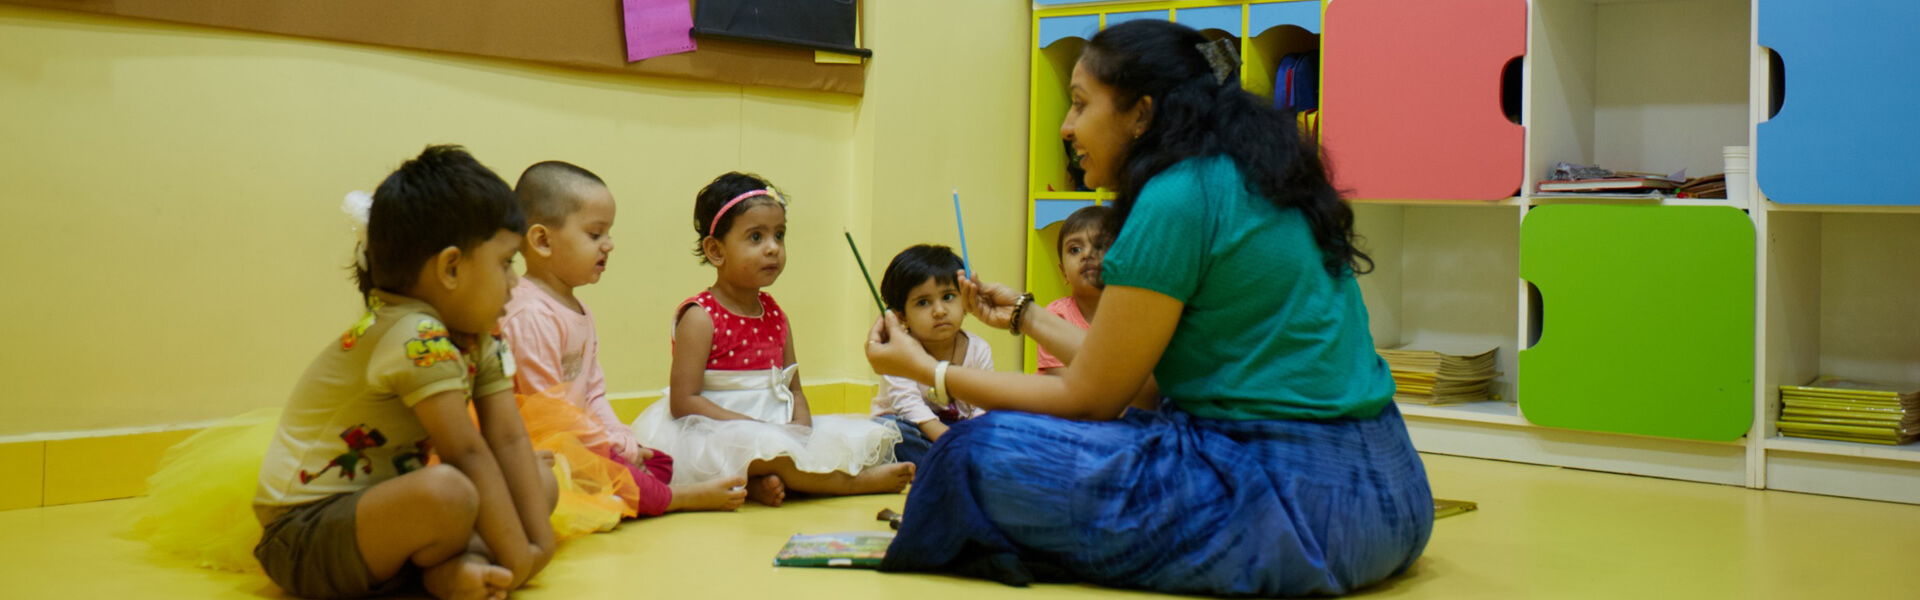 The Importance of Early Childhood Education: Why Preschool Matters